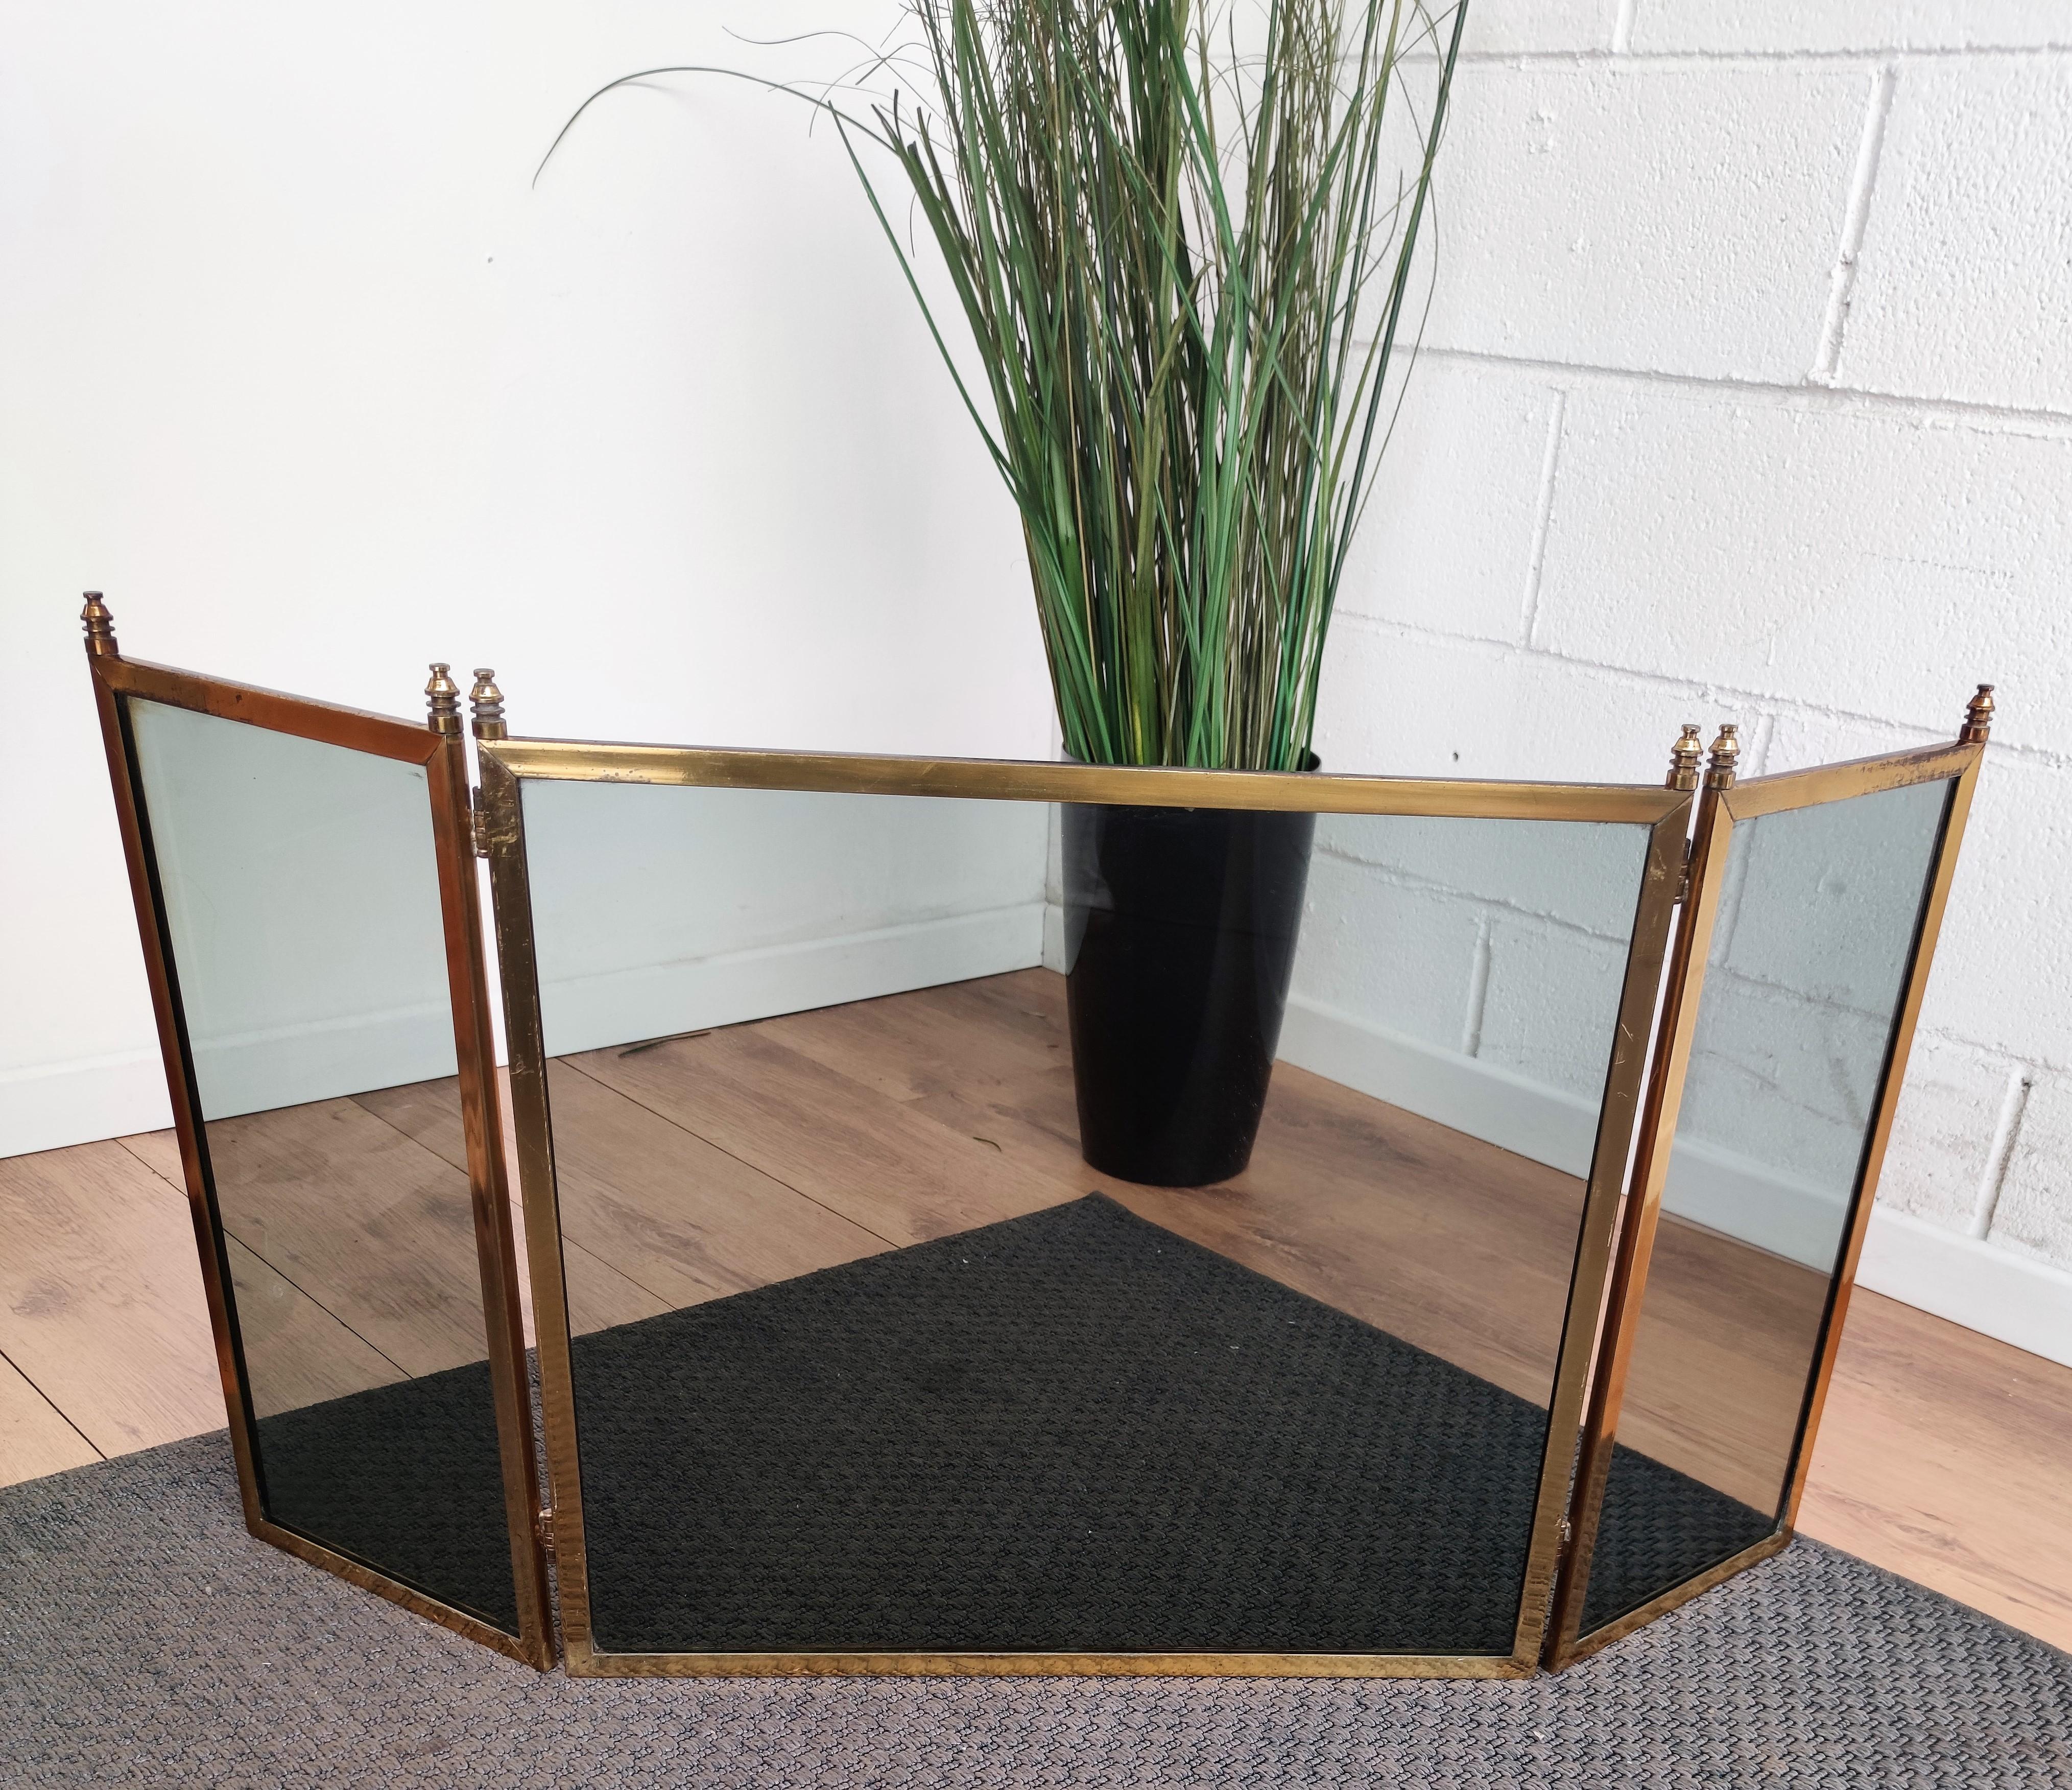 Italian gilt brass and glass foldable fireplace screen or fire screen. Nice decorative piece, this-3 piece screen is easy to tow and use, the piece can be easily folded to adapt and work with any opening. Overall very decorative piece in nice